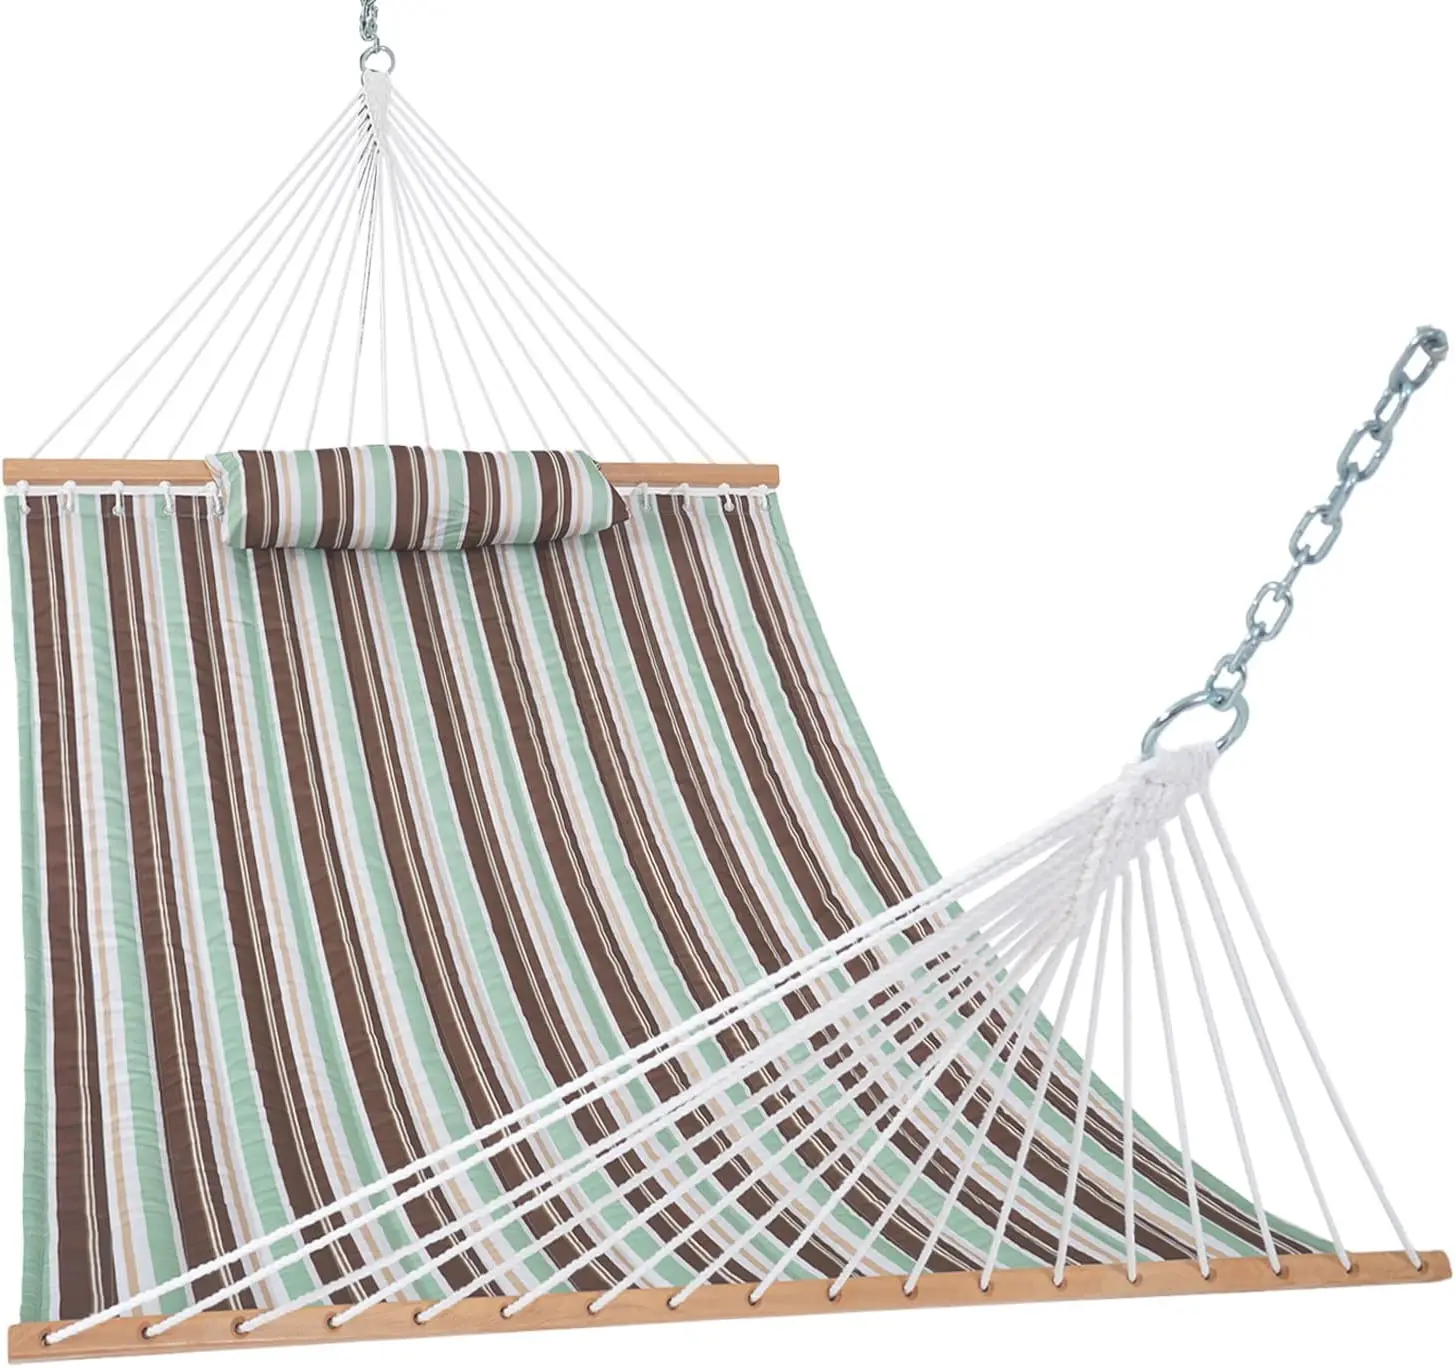 

POPTOP 12 FT Quilted Fabric Double Hammock with Spreader Bars and Detachable Pillow, 2 Person Hammock for Outdoor Patio Backyard